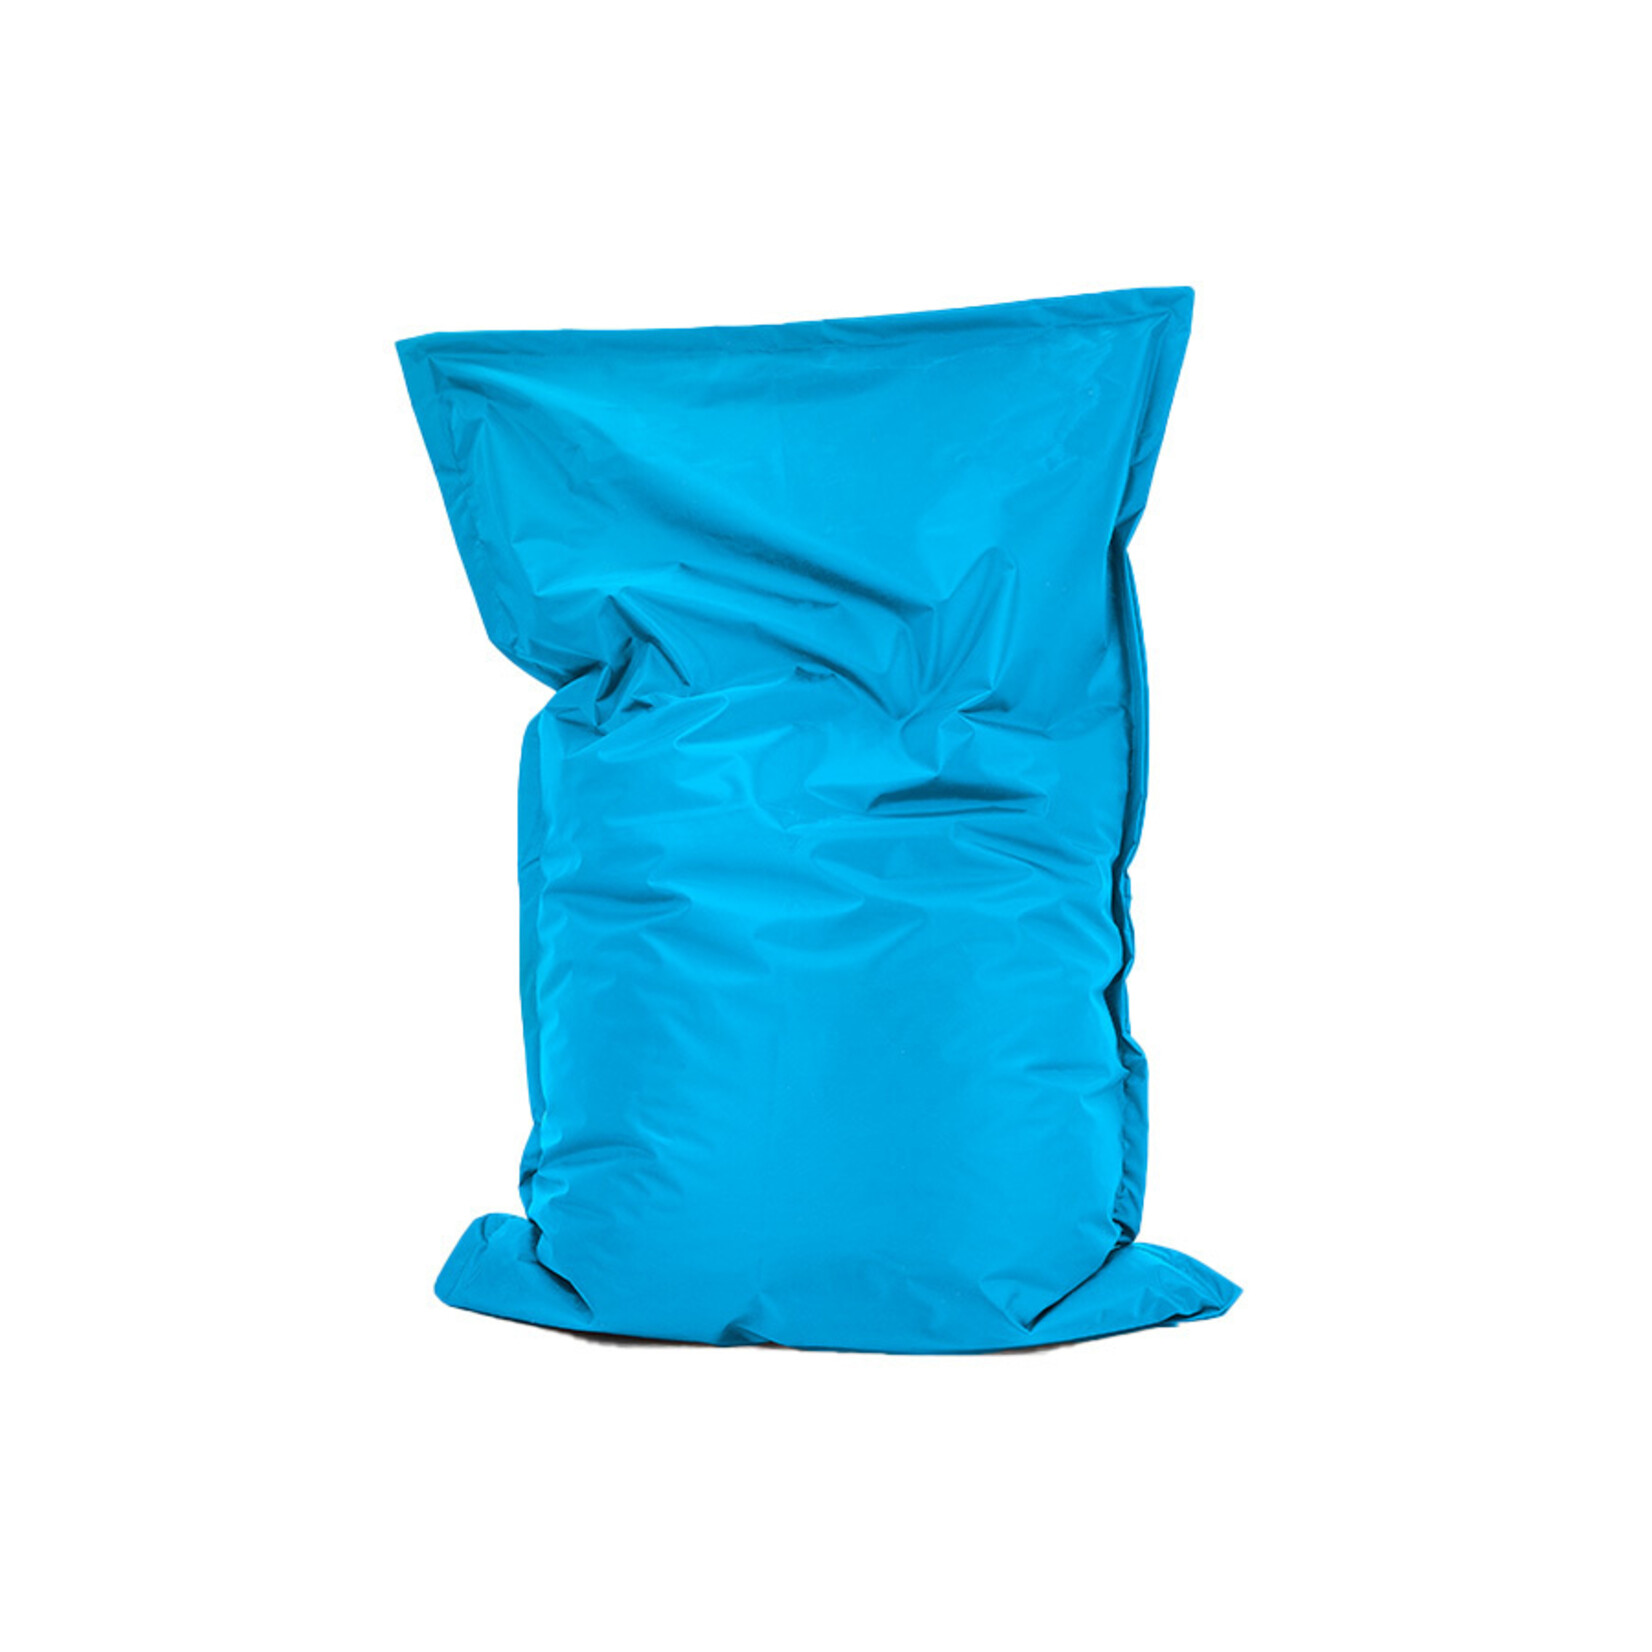 Bobbel Home Bobbel Home - Beanbag Bella - Spacious beanbags - Cushion - Nylon - 100x150 cm - For Indoor and Outdoor - Turquoise